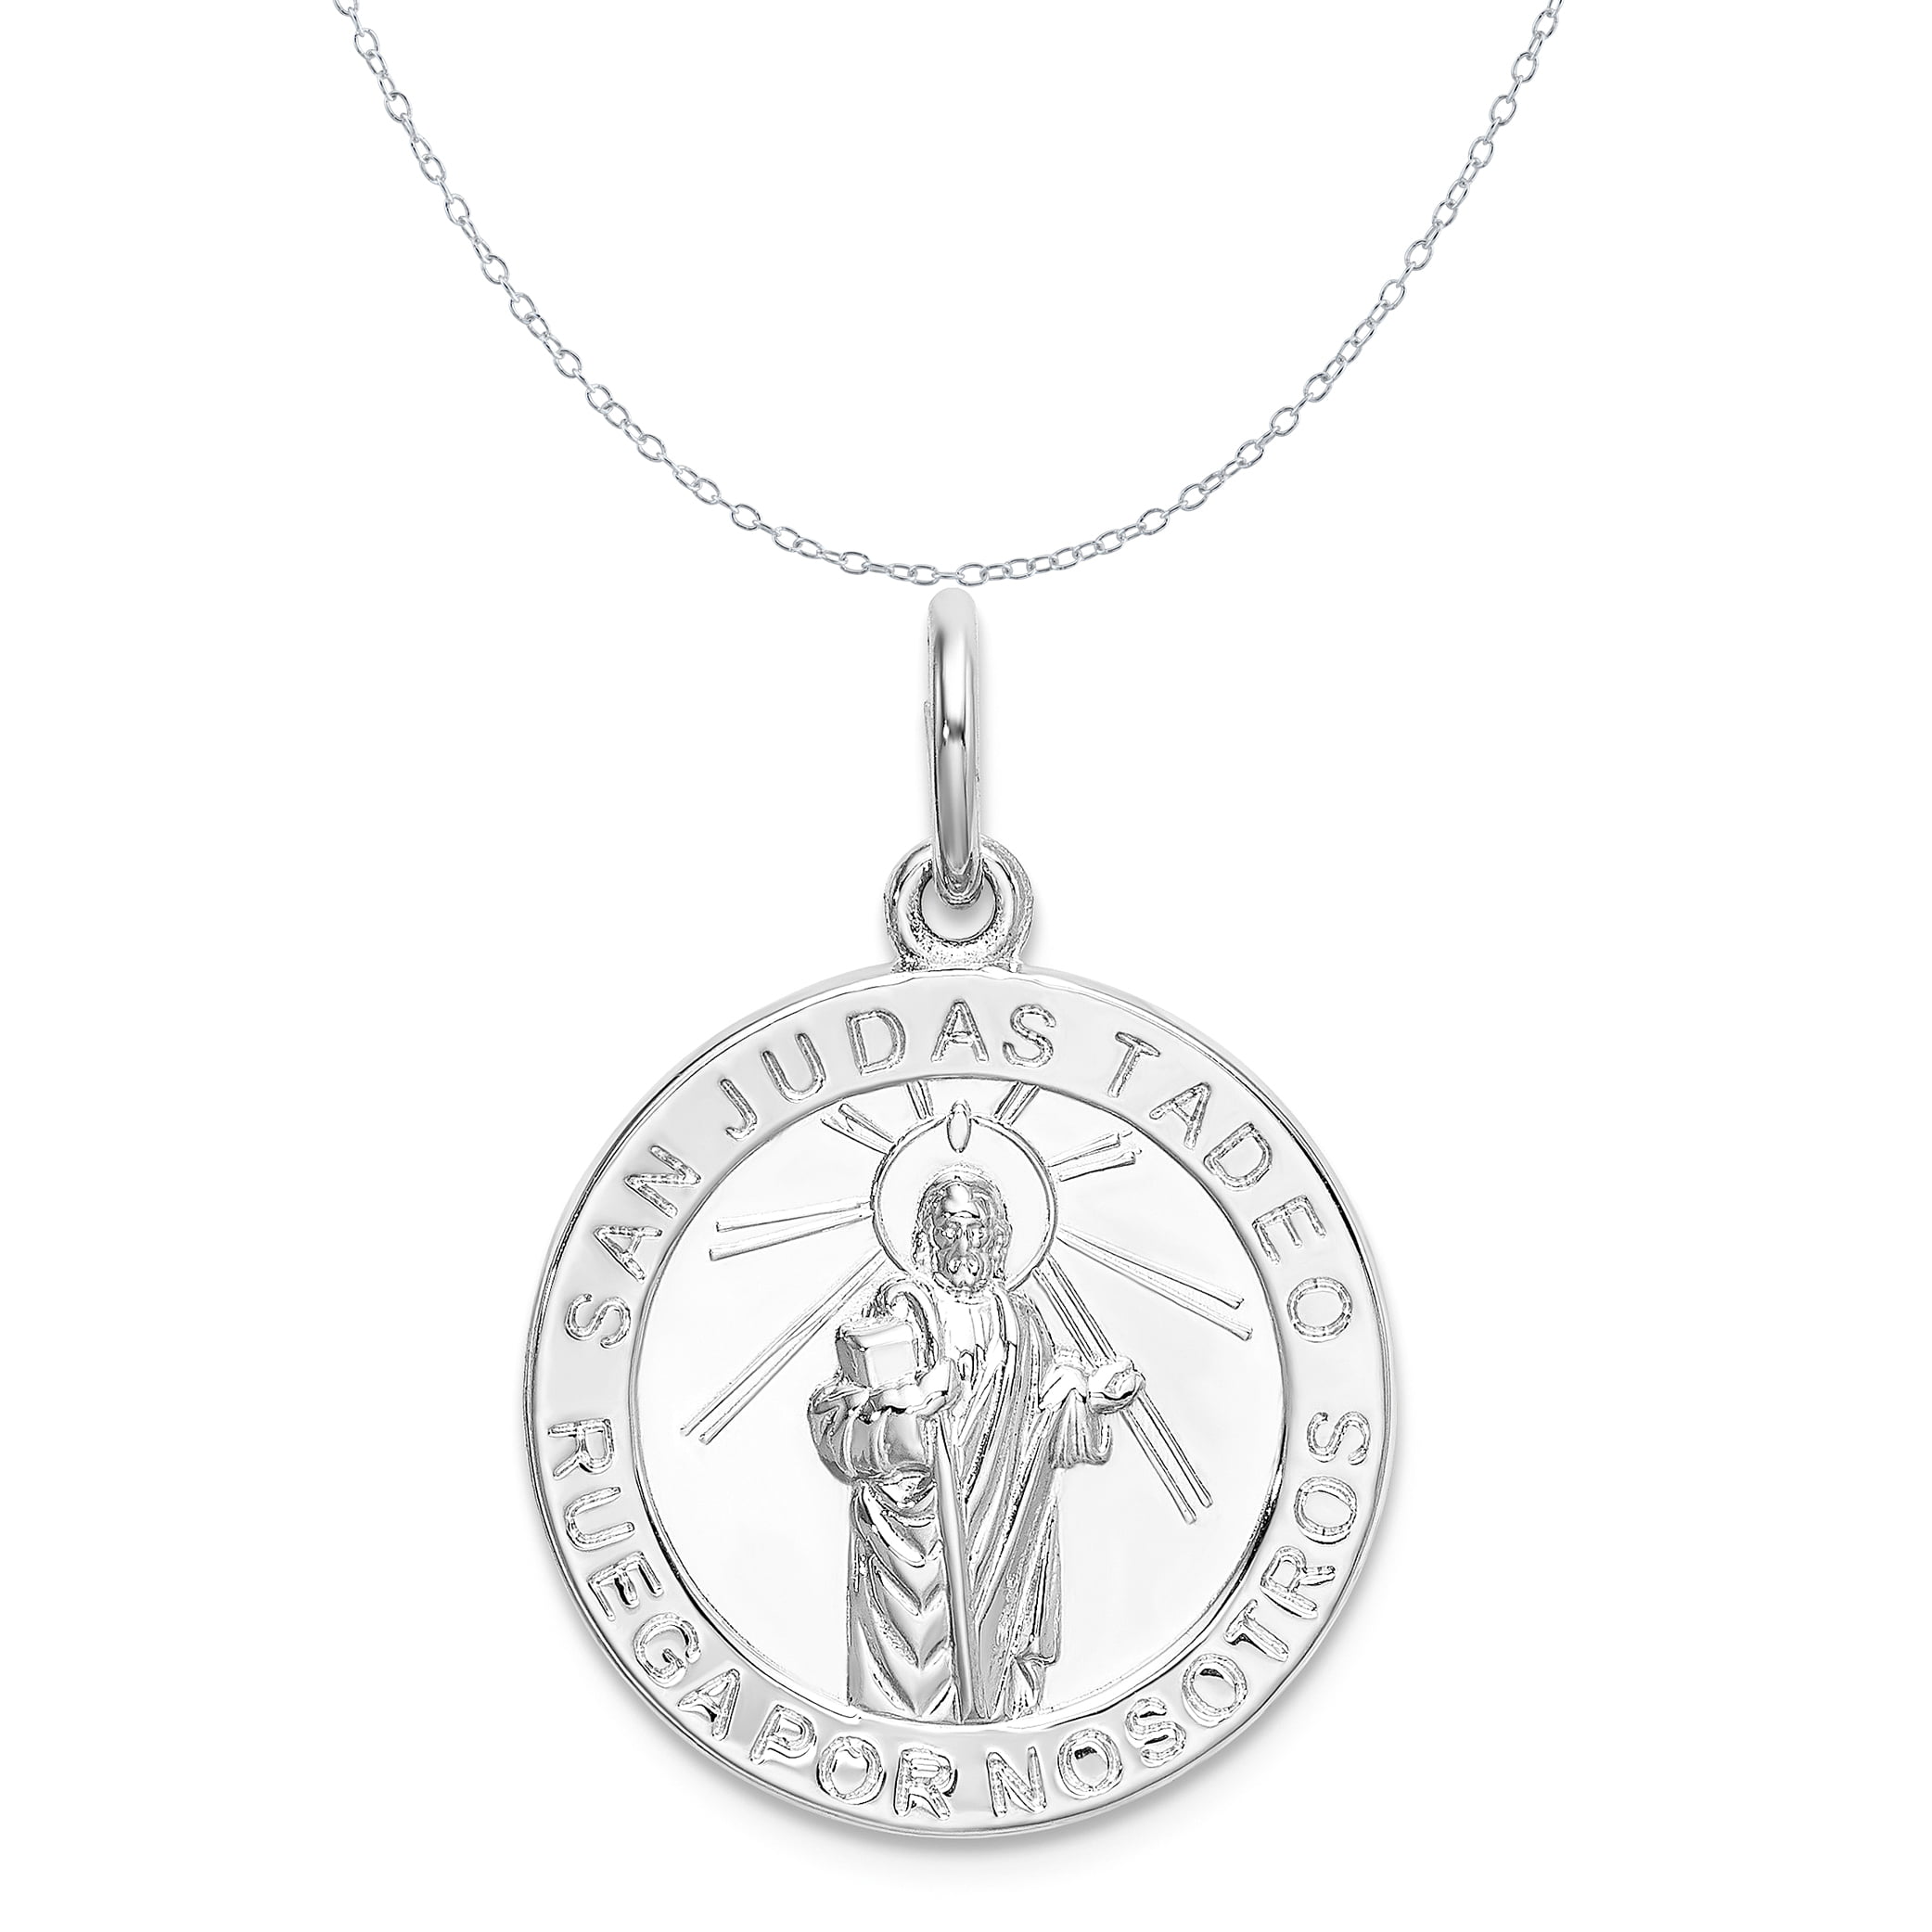 Sterling Silver Anti-Tarnish Treated Miraculous Medal Charm on an Adjustable Chain Necklace